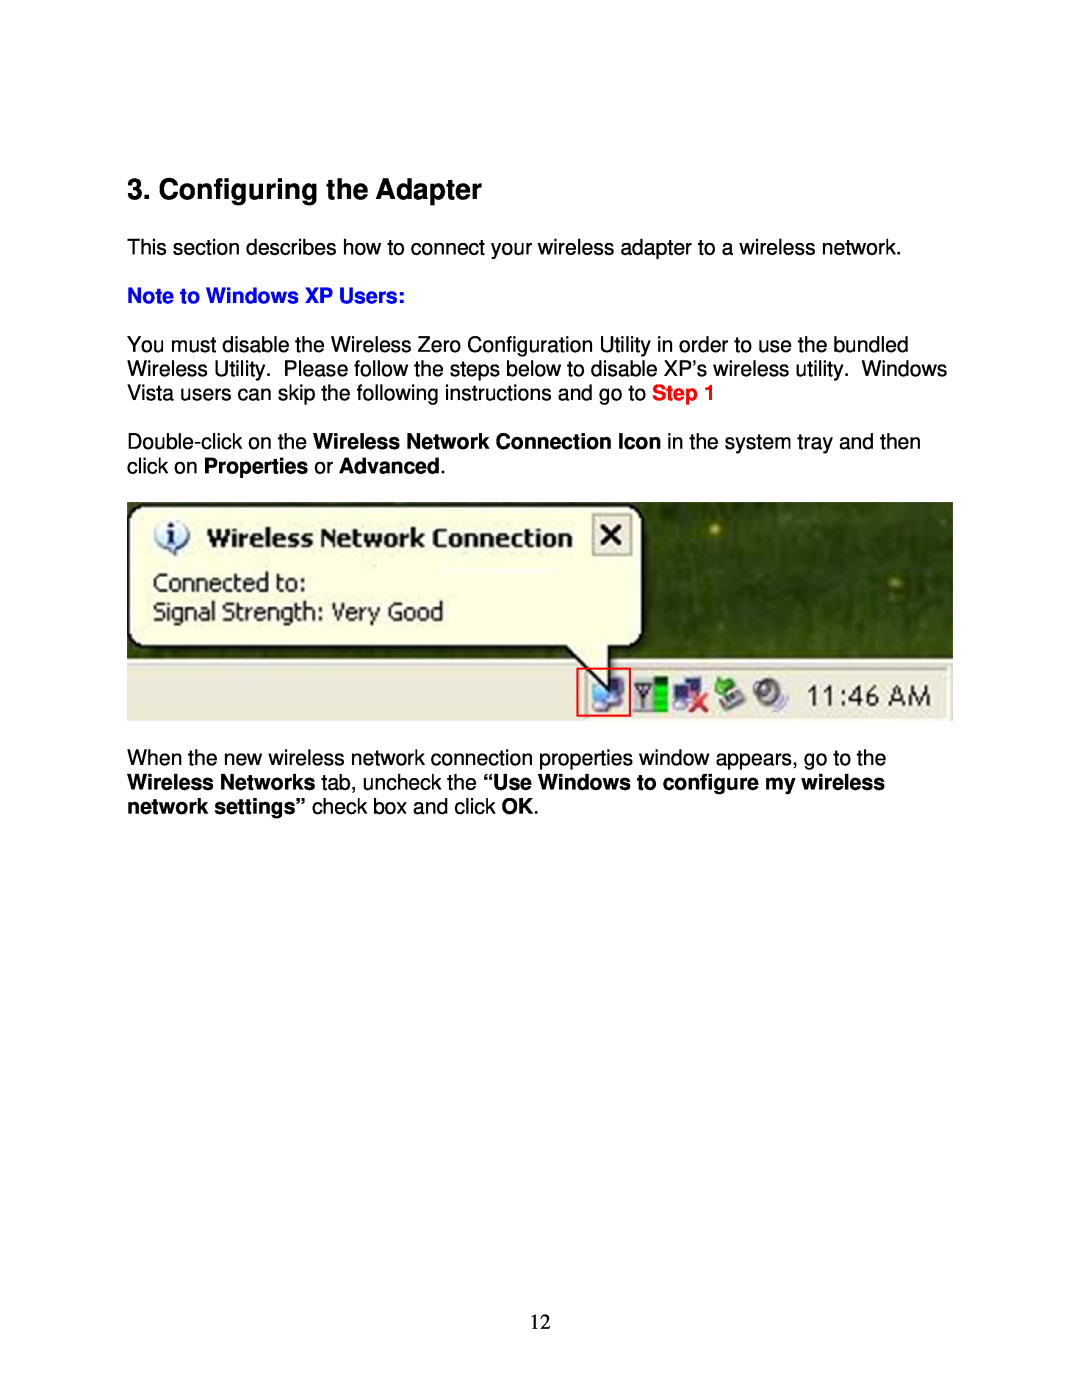 Airlink101 AWLL6090 user manual Configuring the Adapter, Note to Windows XP Users 